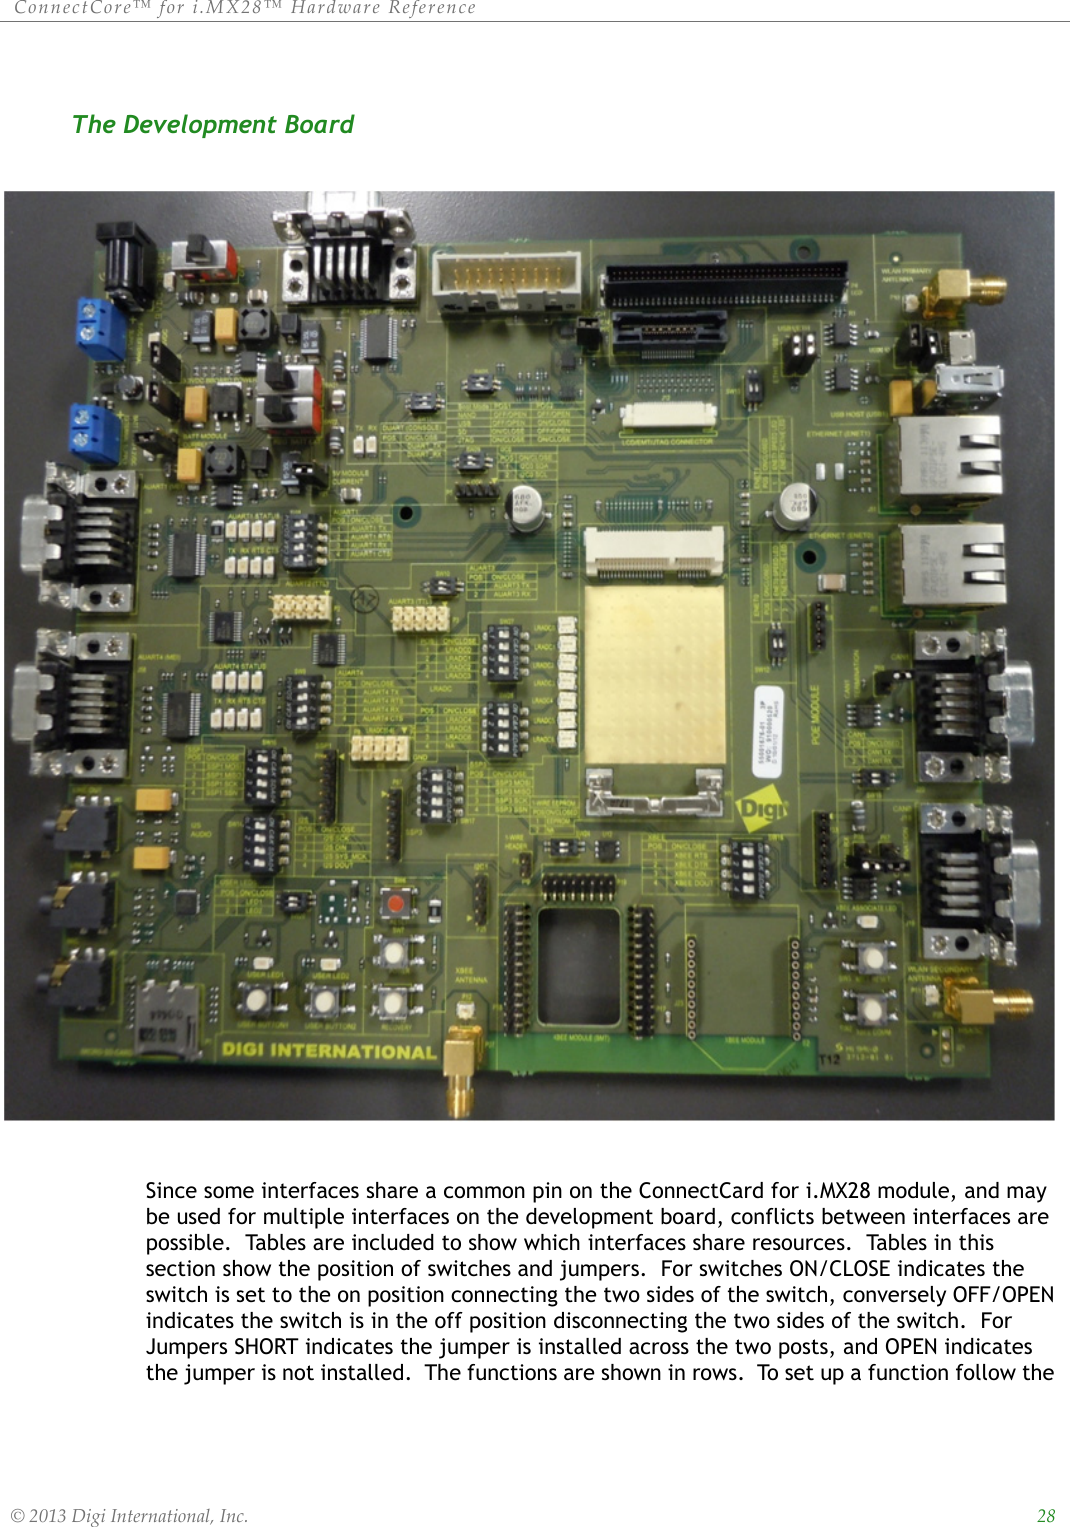 ConnectCore™ for i.MX28™ Hardware Reference  © 2013 Digi International, Inc.    28The Development Board Since some interfaces share a common pin on the ConnectCard for i.MX28 module, and may be used for multiple interfaces on the development board, conflicts between interfaces are possible.  Tables are included to show which interfaces share resources.  Tables in this section show the position of switches and jumpers.  For switches ON/CLOSE indicates the switch is set to the on position connecting the two sides of the switch, conversely OFF/OPEN indicates the switch is in the off position disconnecting the two sides of the switch.  For Jumpers SHORT indicates the jumper is installed across the two posts, and OPEN indicates the jumper is not installed.  The functions are shown in rows.  To set up a function follow the 